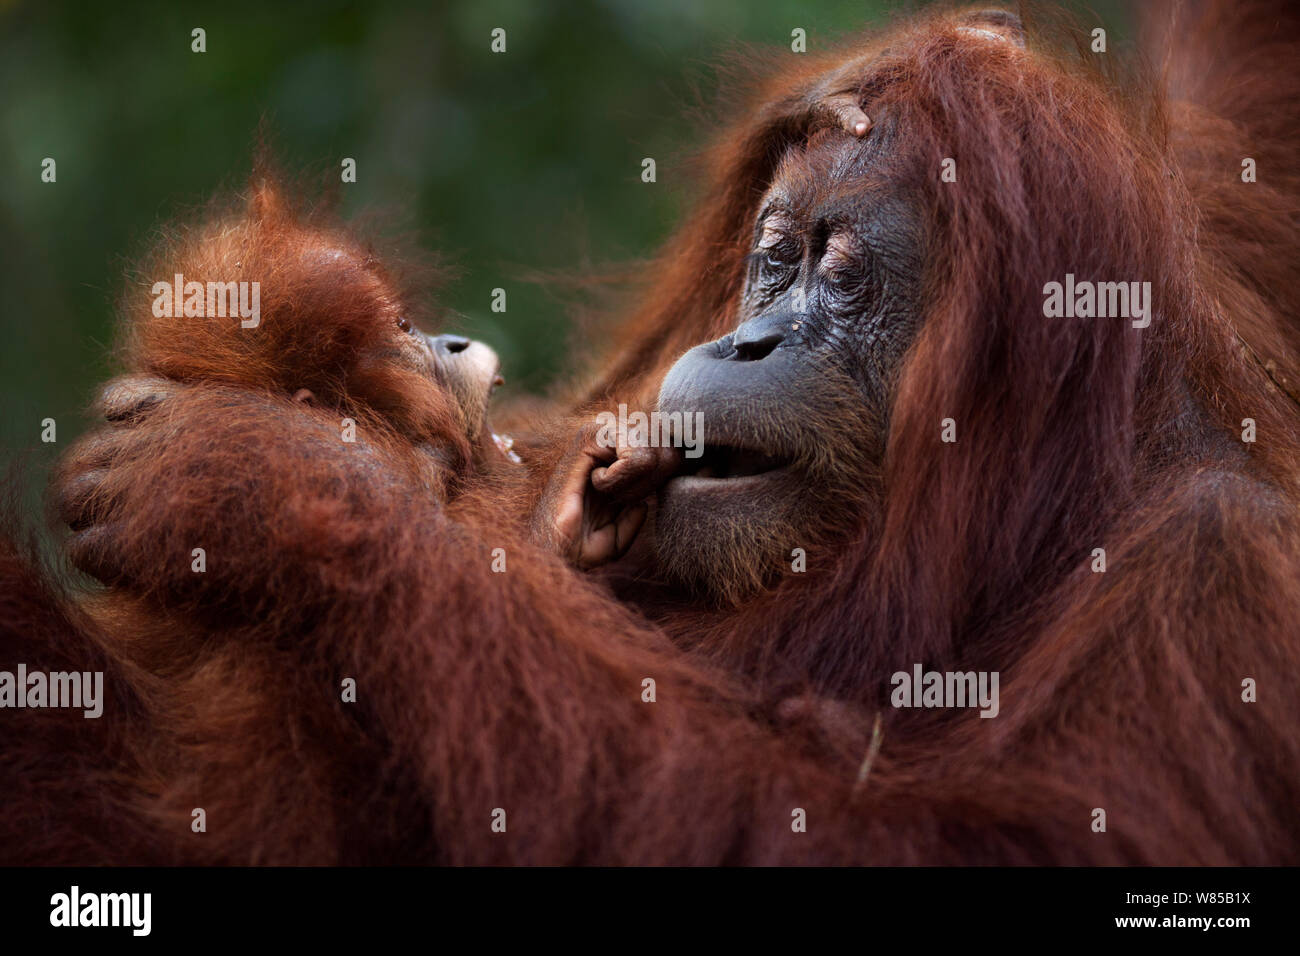 Sumatran orangutan (Pongo abelii) female 'Sandra' aged 22 years playing with baby daughter 'Sandri' aged 1-2 years. Gunung Leuser National Park, Sumatra, Indonesia. Rehabilitated and released (or descended from those which were released) between 1973 and 1995. Stock Photo